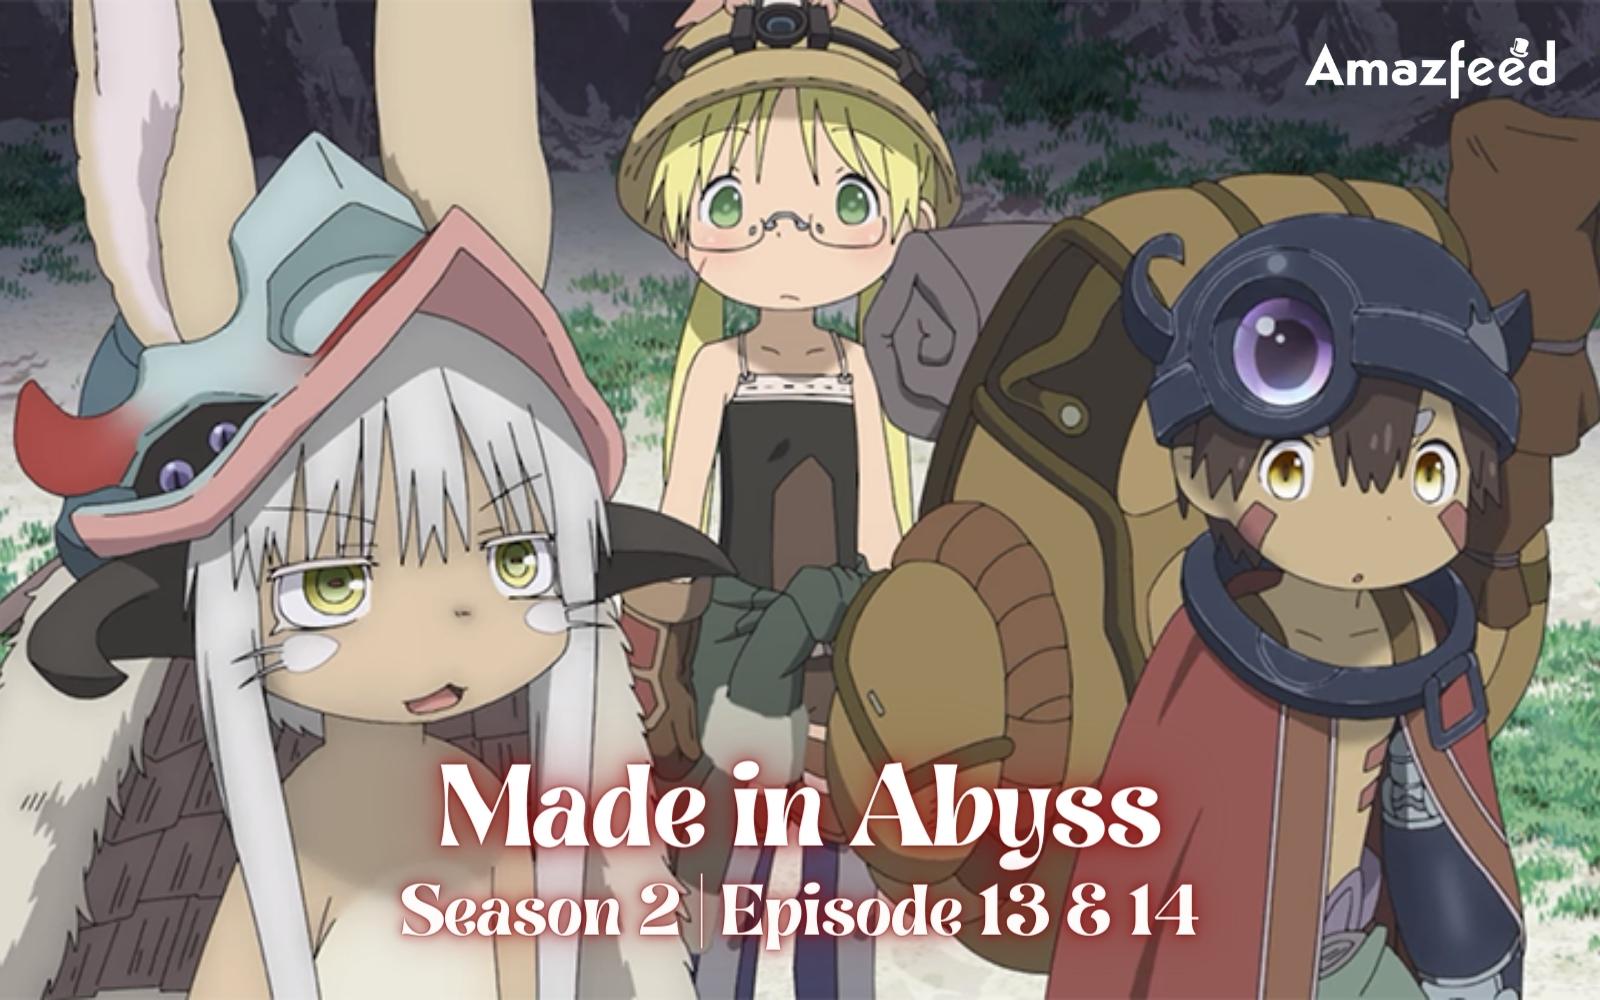 Made in Abyss Season 2 Episode 13 & 14 : Where to Watch, Countdown, Release Date, Recap, Cast & Spoiler